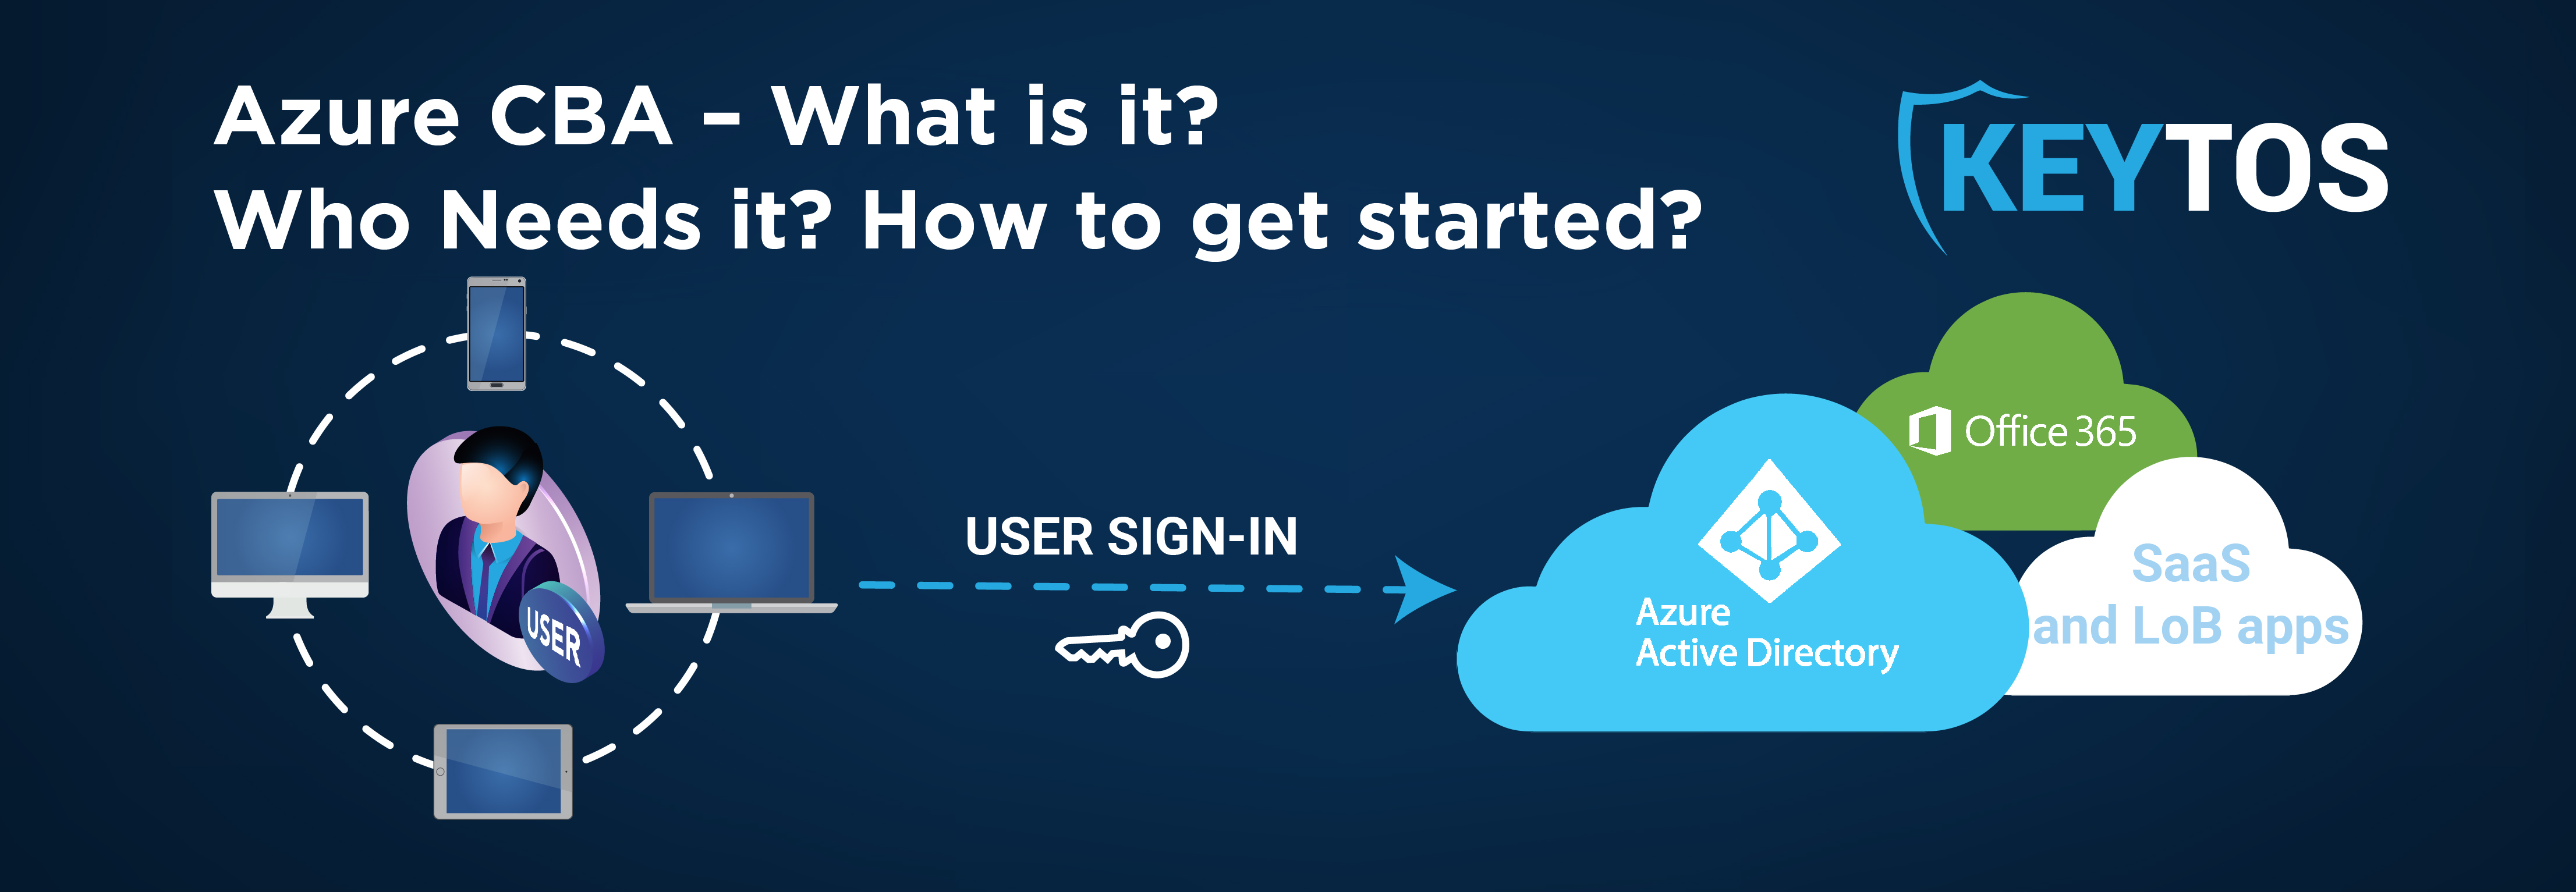 What is Azure CBA and how to get started with Azure CBA